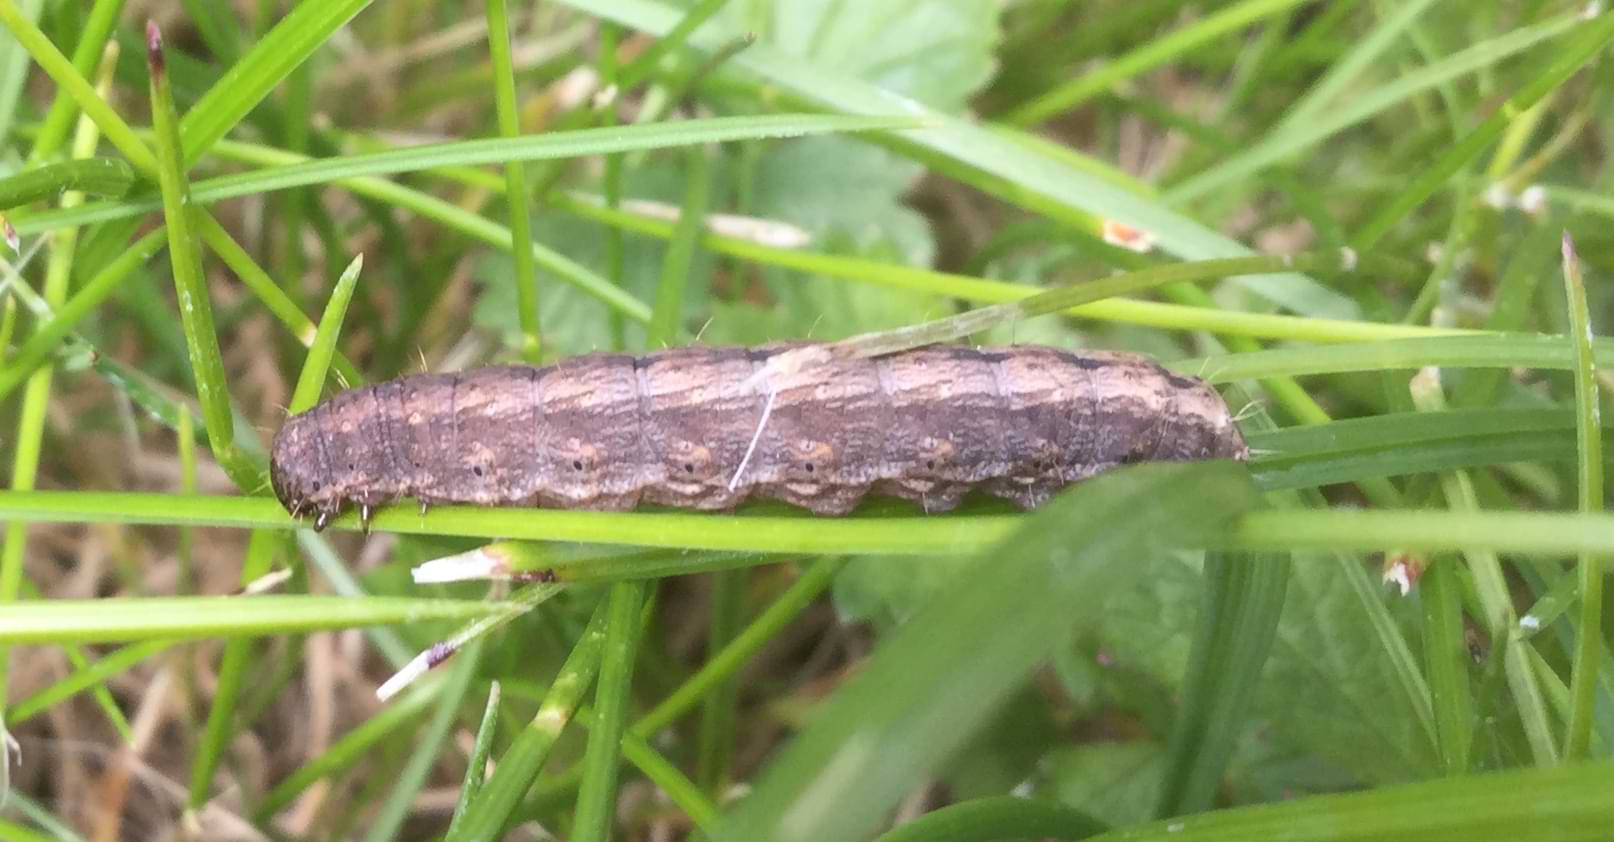 A small grey caterpillar crawling on blades of grass. It has a few tiny hairs all over its body and very small legs near its head.